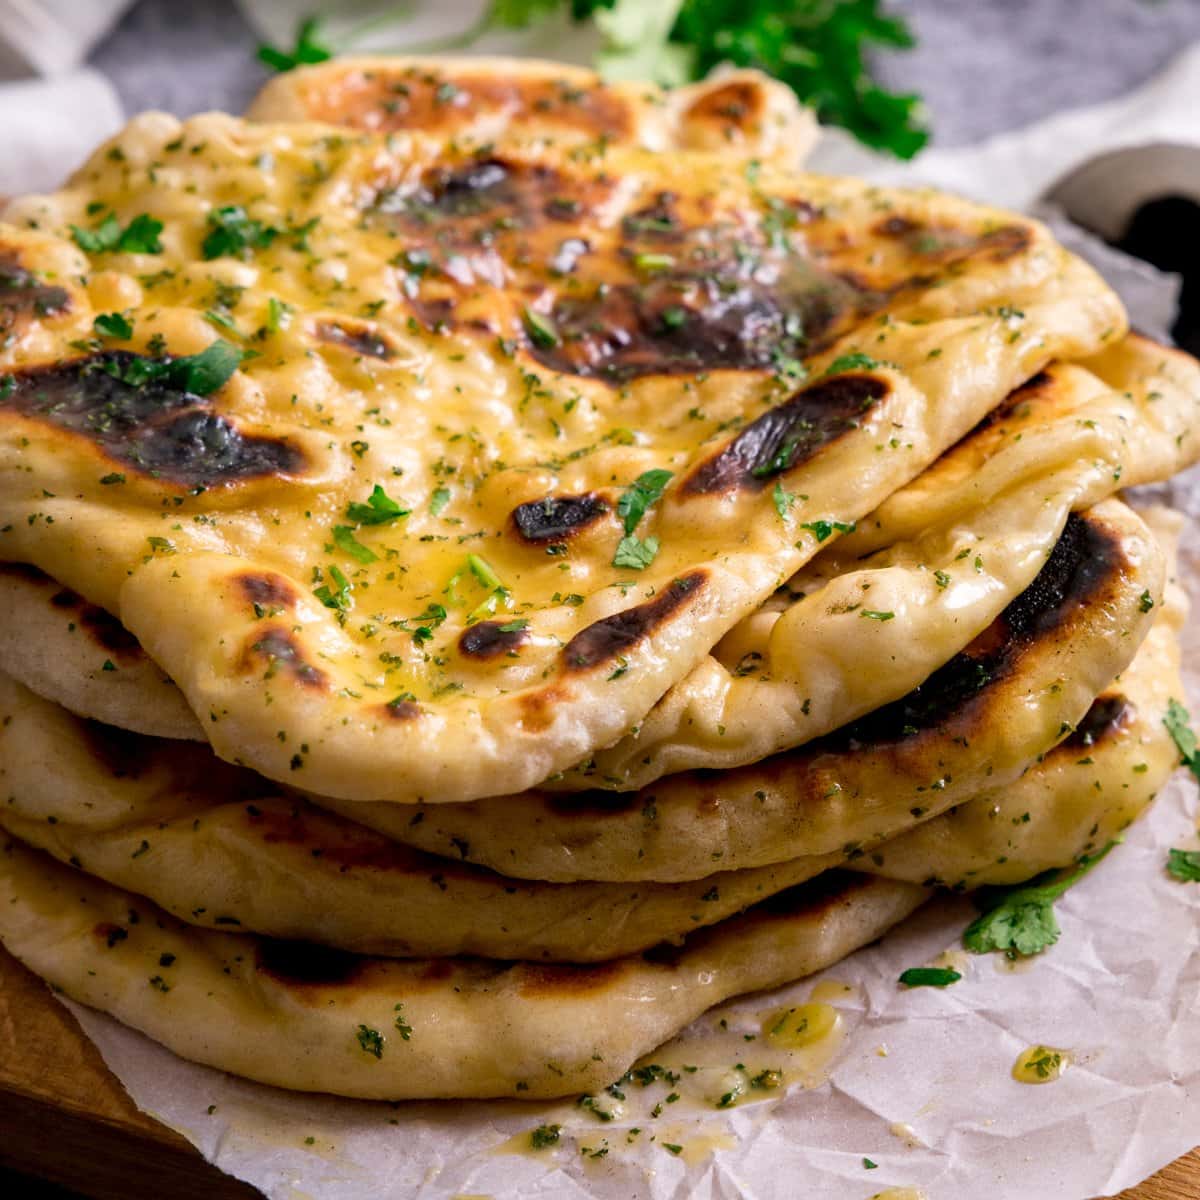 Pile of garlic naan breads on a piece of parchment on top of a wooden board.